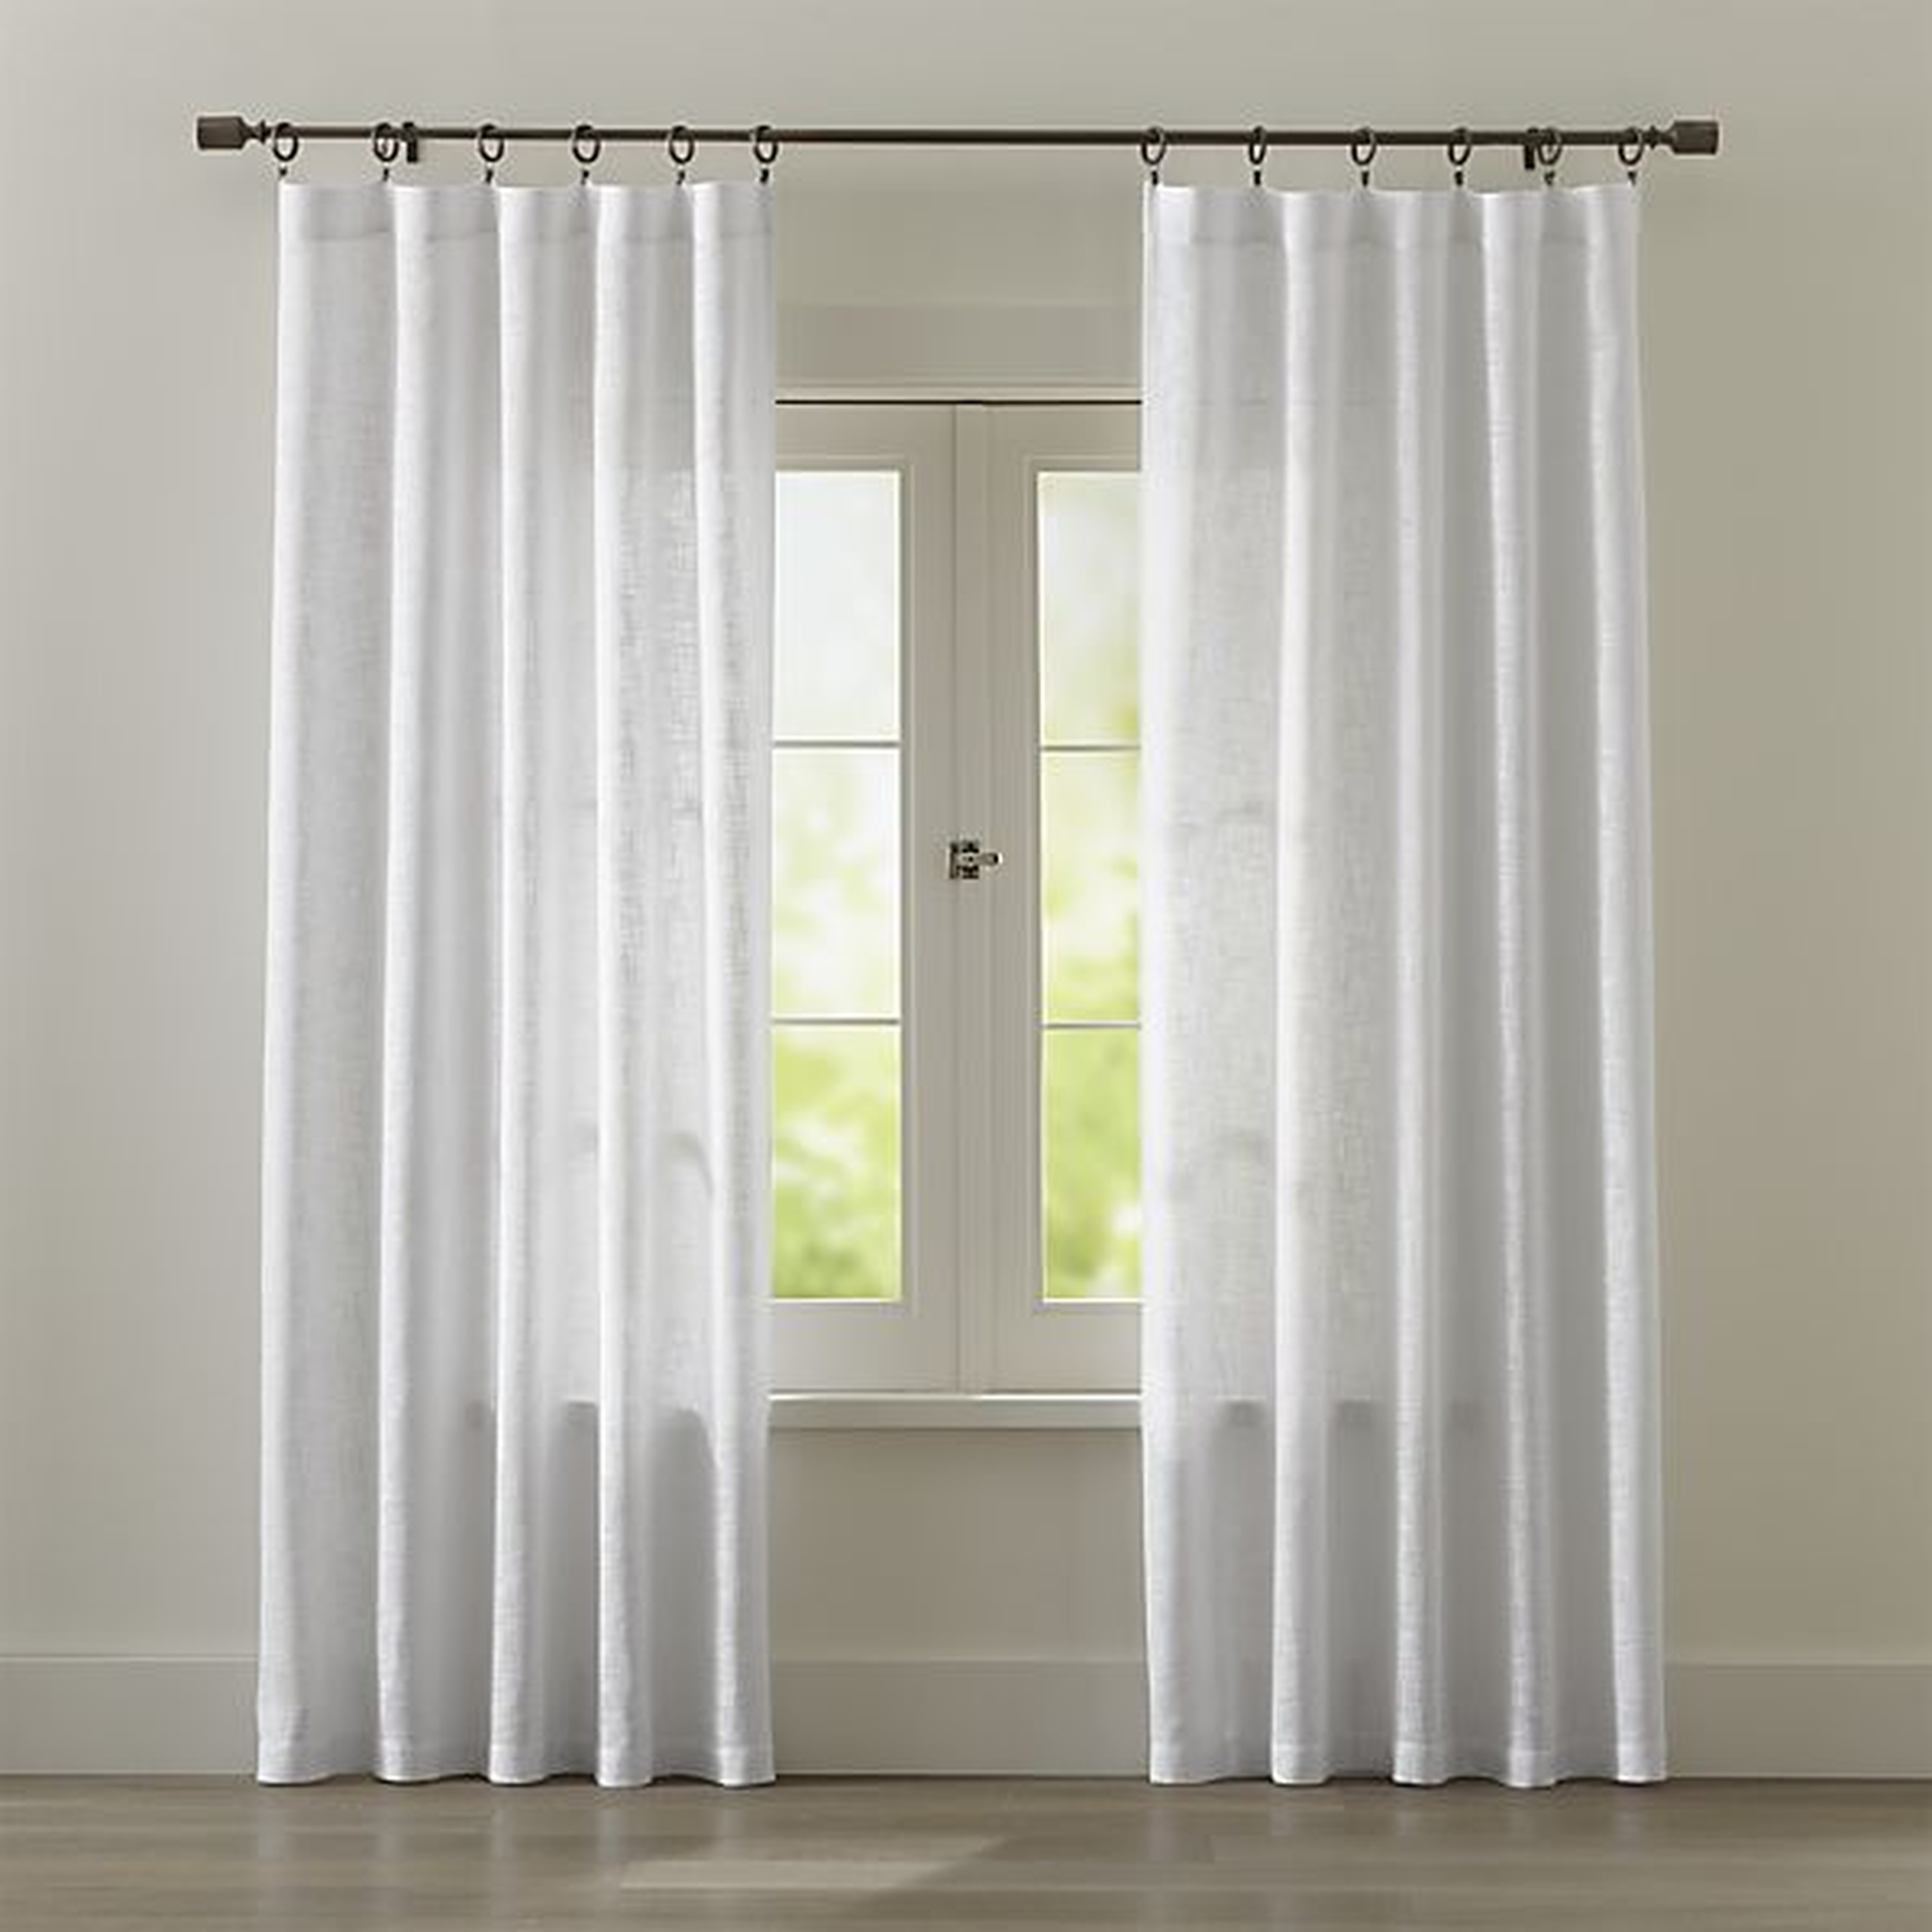 Lindstrom White Curtains - 108" - Crate and Barrel